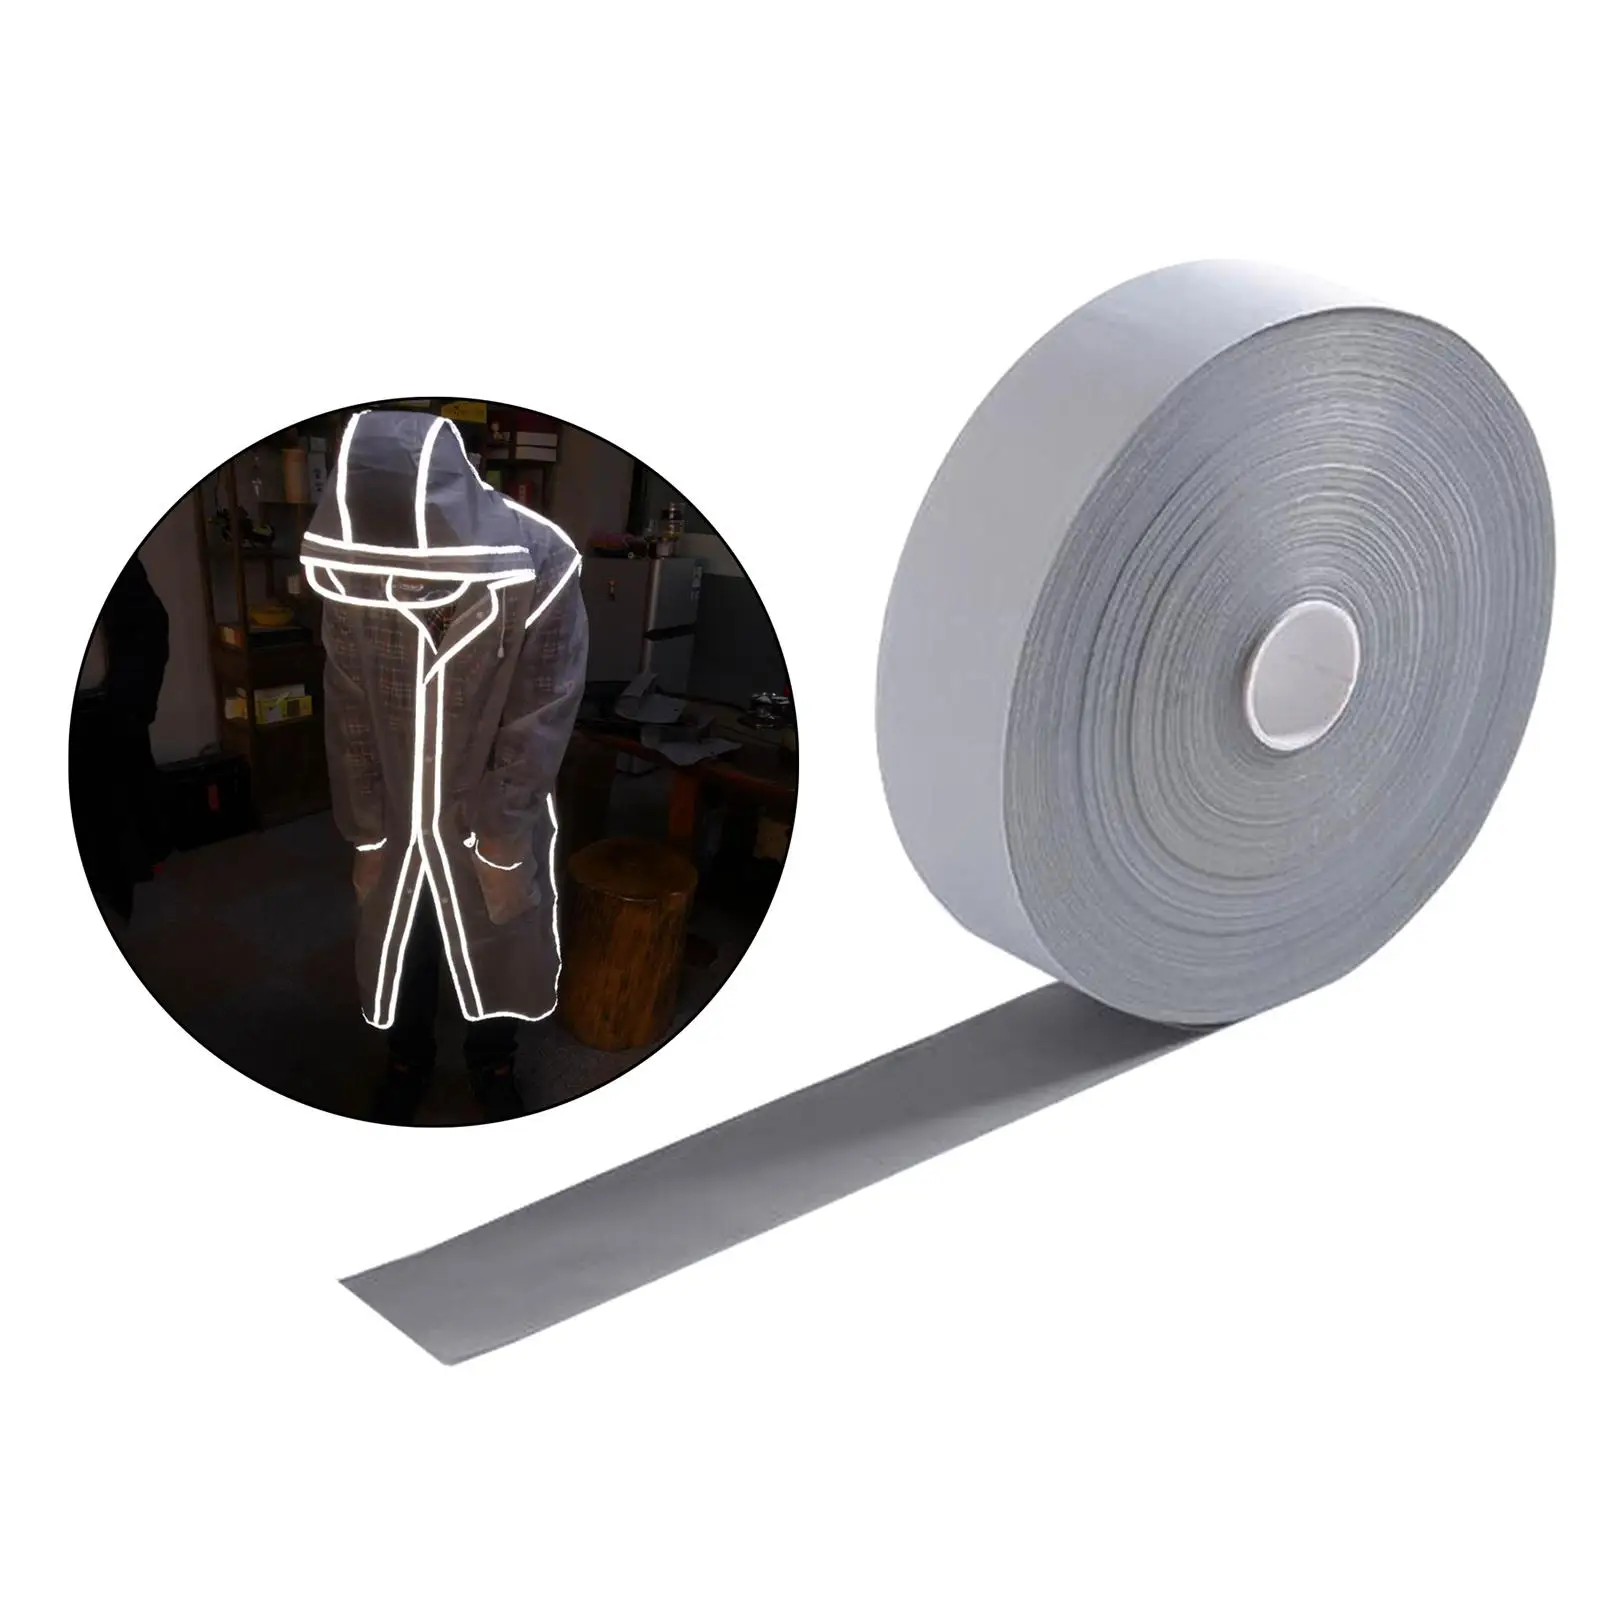 Reflective Tape Adhesive Conspicuity Tape for Handmade Crafts